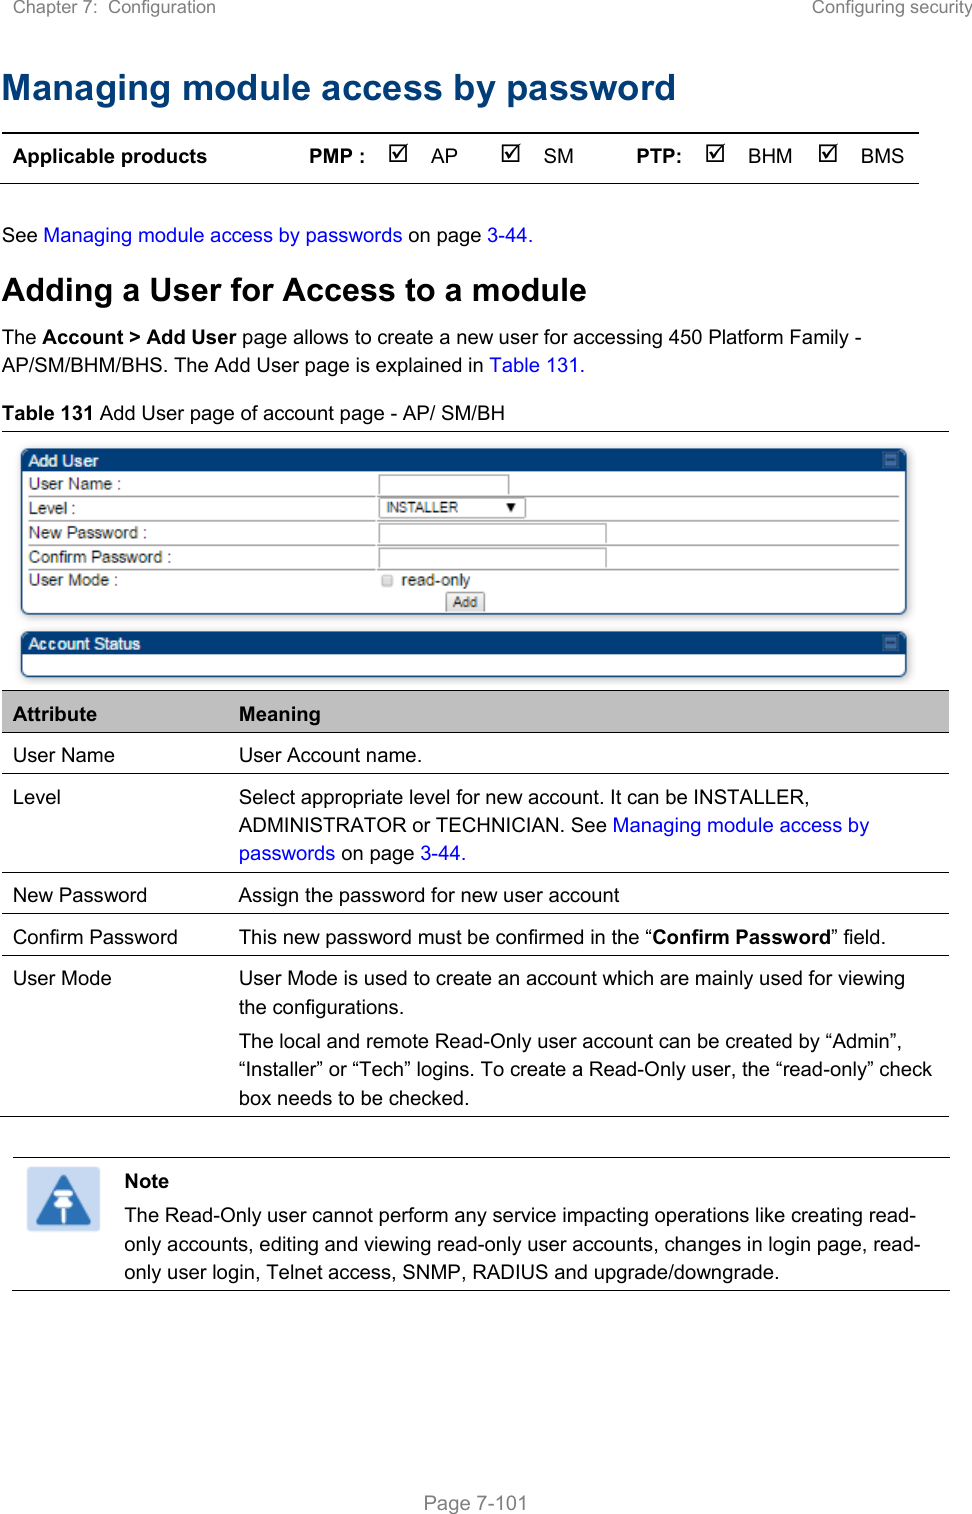 Chapter 7:  Configuration  Configuring security   Page 7-101 Managing module access by password Applicable products  PMP :  AP  SM  PTP: BHM   BMS  See Managing module access by passwords on page 3-44. Adding a User for Access to a module The Account &gt; Add User page allows to create a new user for accessing 450 Platform Family - AP/SM/BHM/BHS. The Add User page is explained in Table 131. Table 131 Add User page of account page - AP/ SM/BH  Attribute  Meaning User Name  User Account name. Level  Select appropriate level for new account. It can be INSTALLER, ADMINISTRATOR or TECHNICIAN. See Managing module access by passwords on page 3-44. New Password  Assign the password for new user account Confirm Password  This new password must be confirmed in the “Confirm Password” field. User Mode  User Mode is used to create an account which are mainly used for viewing the configurations.  The local and remote Read-Only user account can be created by “Admin”, “Installer” or “Tech” logins. To create a Read-Only user, the “read-only” check box needs to be checked.   Note The Read-Only user cannot perform any service impacting operations like creating read-only accounts, editing and viewing read-only user accounts, changes in login page, read-only user login, Telnet access, SNMP, RADIUS and upgrade/downgrade.  